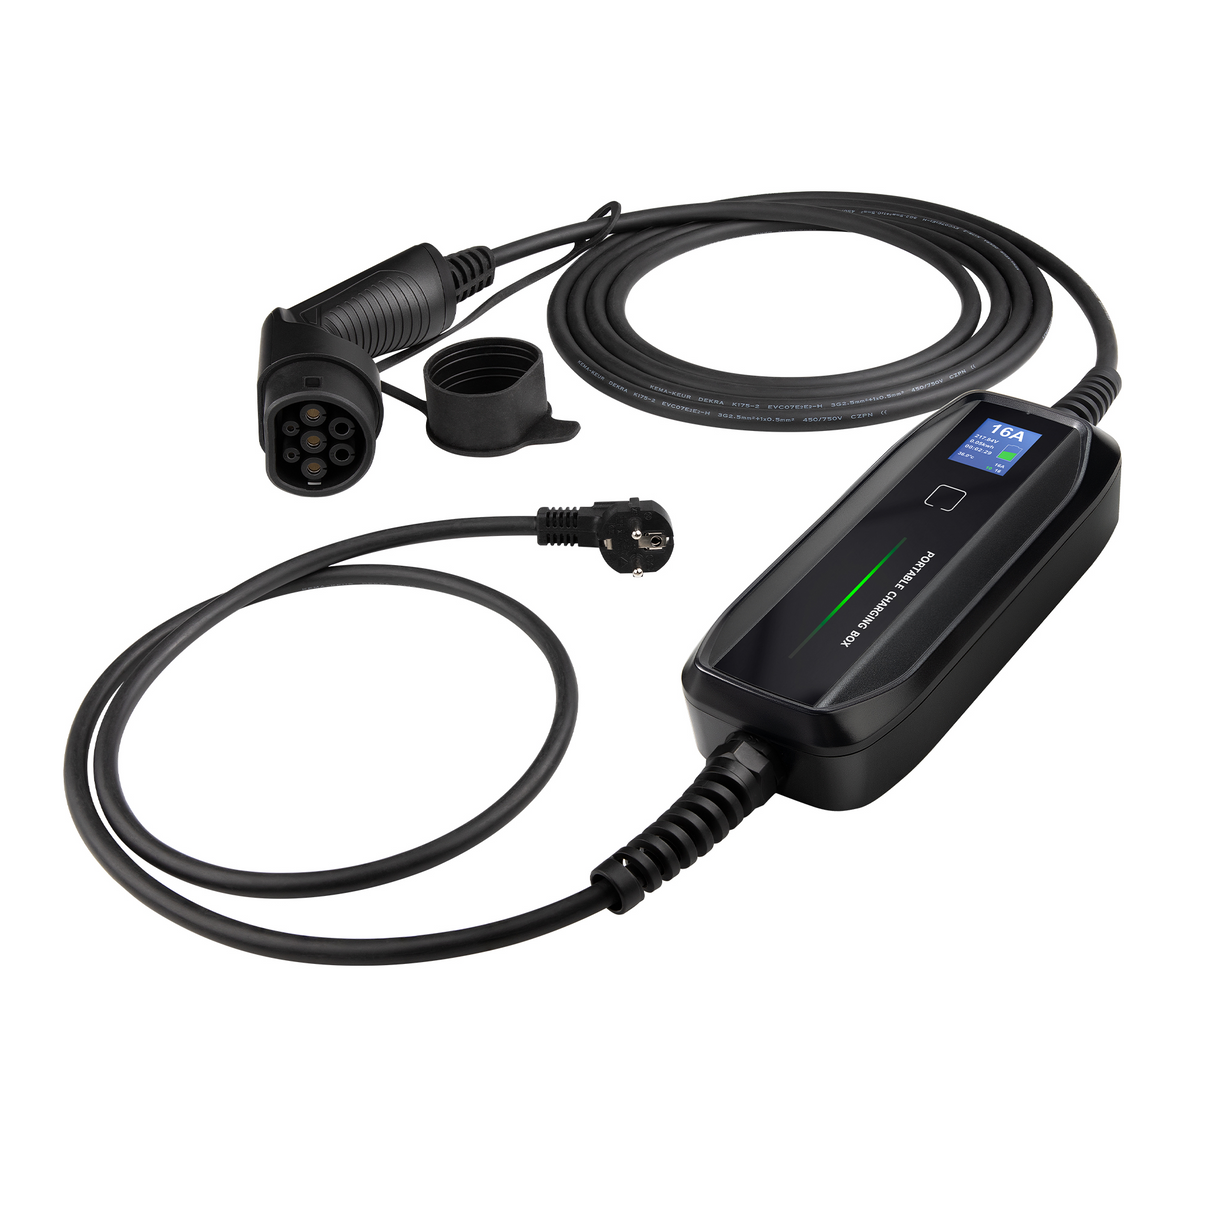 Mobile charger Honda CR -V - Besen with LCD - Type 2 to Schuko